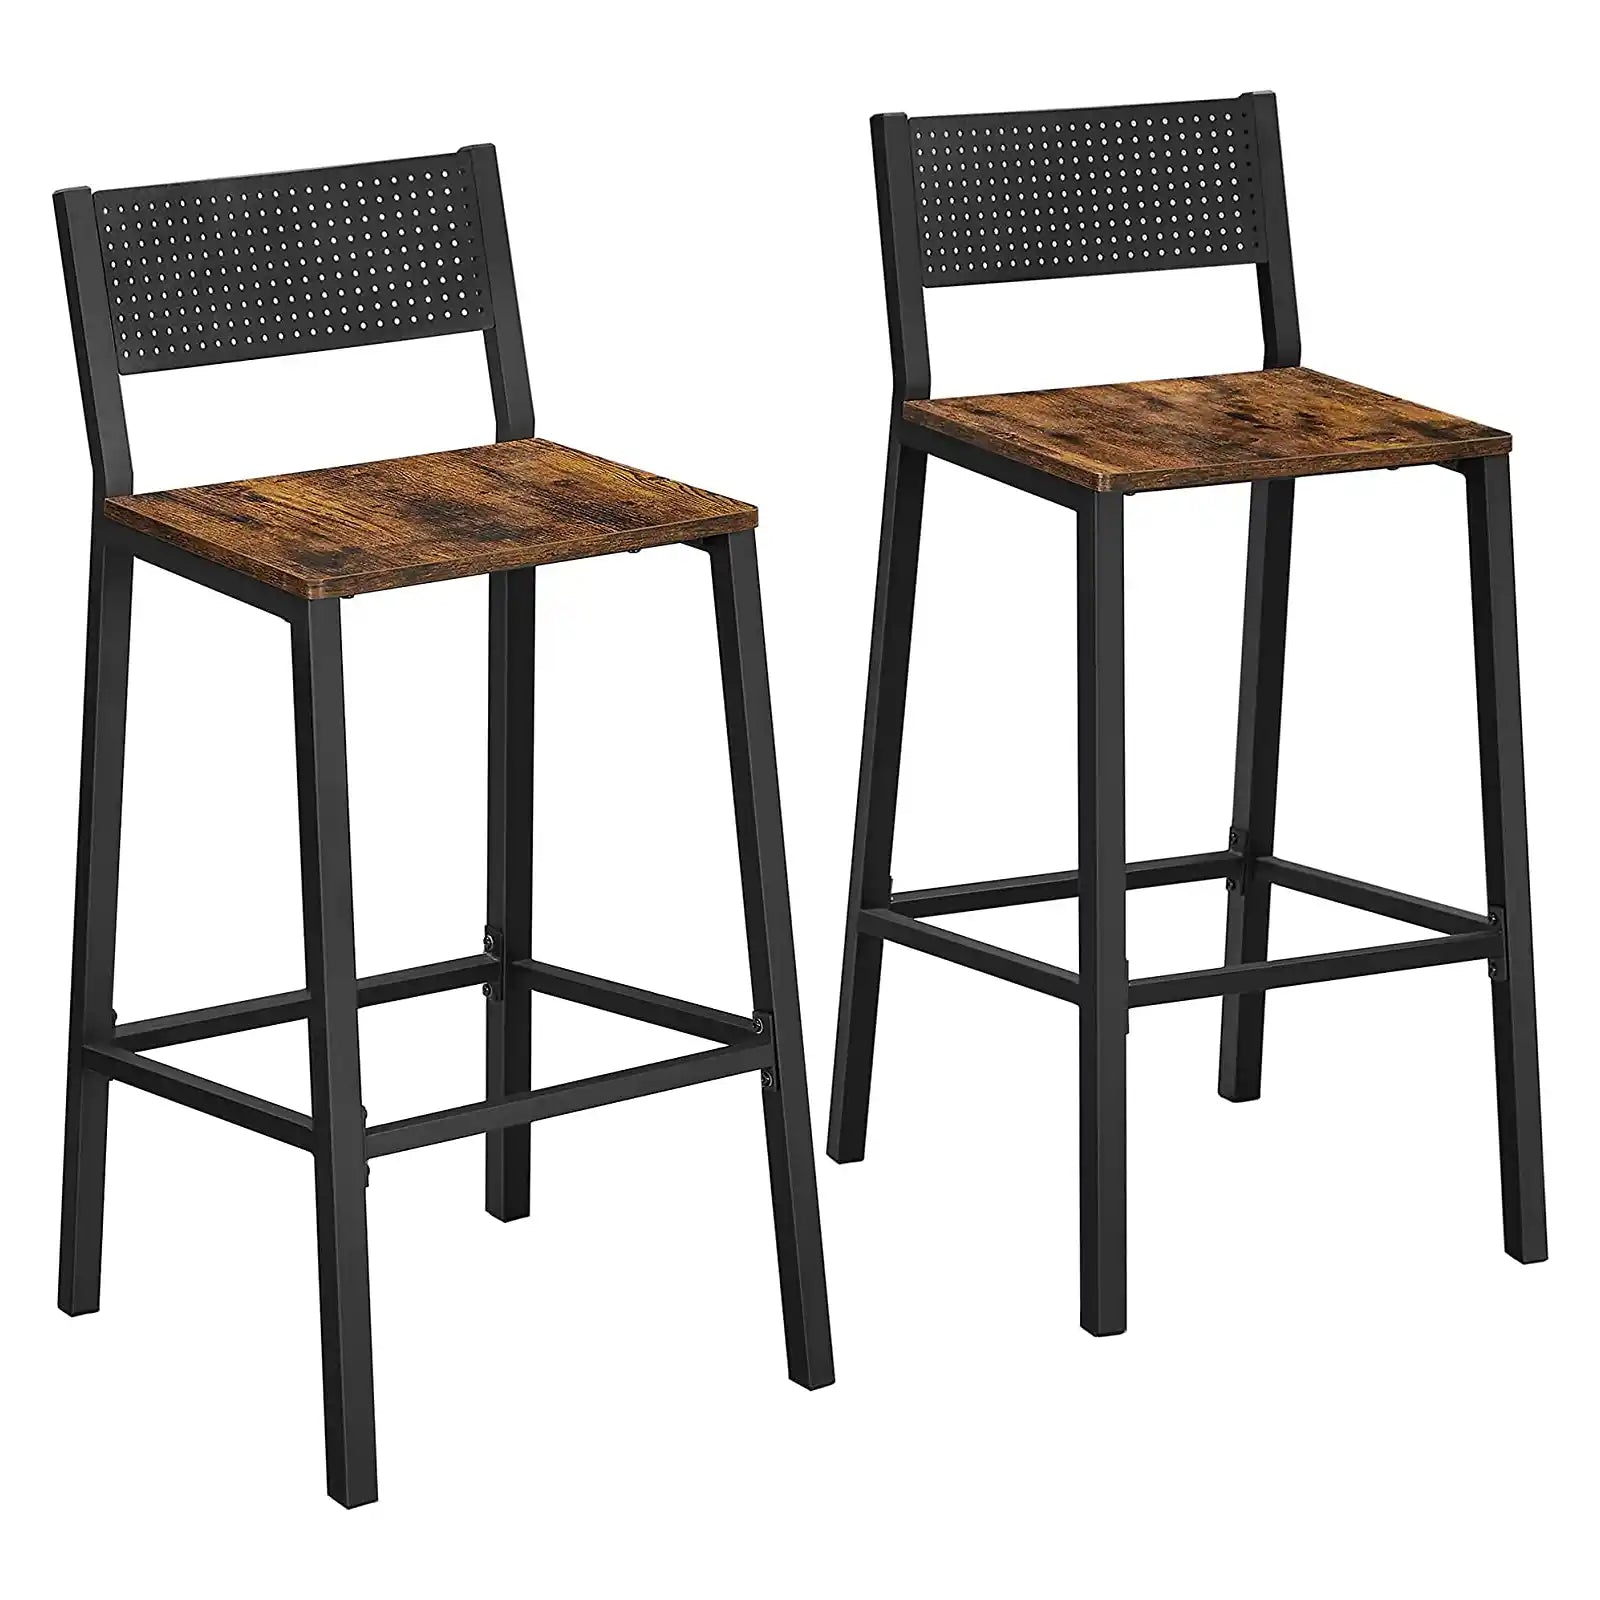 Set of 2  Farmhouse Bar Stools, Bar Chairs with Backrest with Bar Table